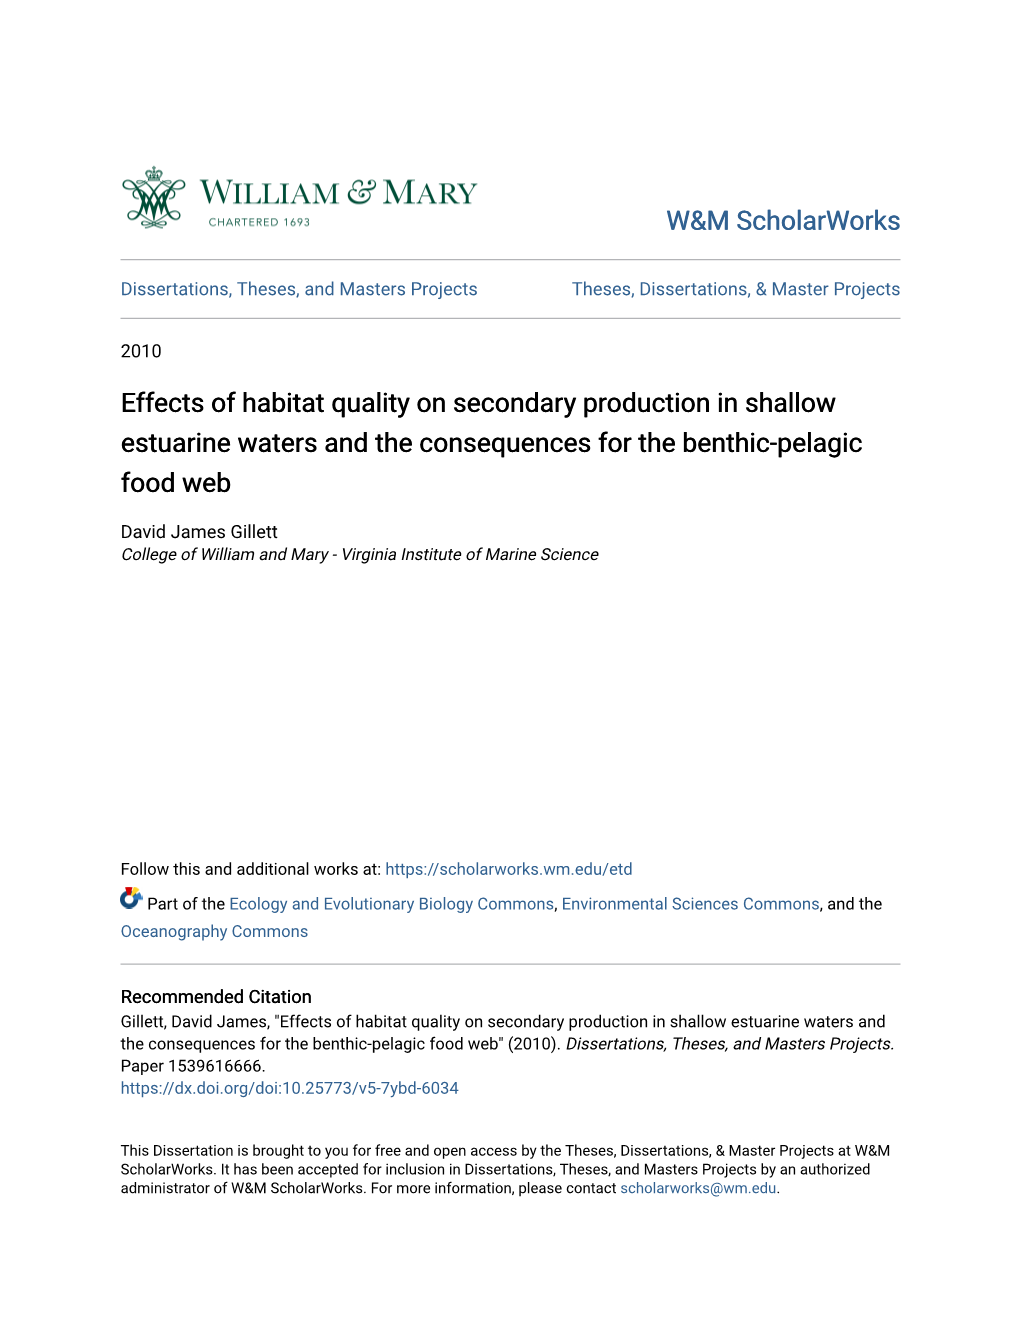 Effects of Habitat Quality on Secondary Production in Shallow Estuarine Waters and the Consequences for the Benthic-Pelagic Food Web